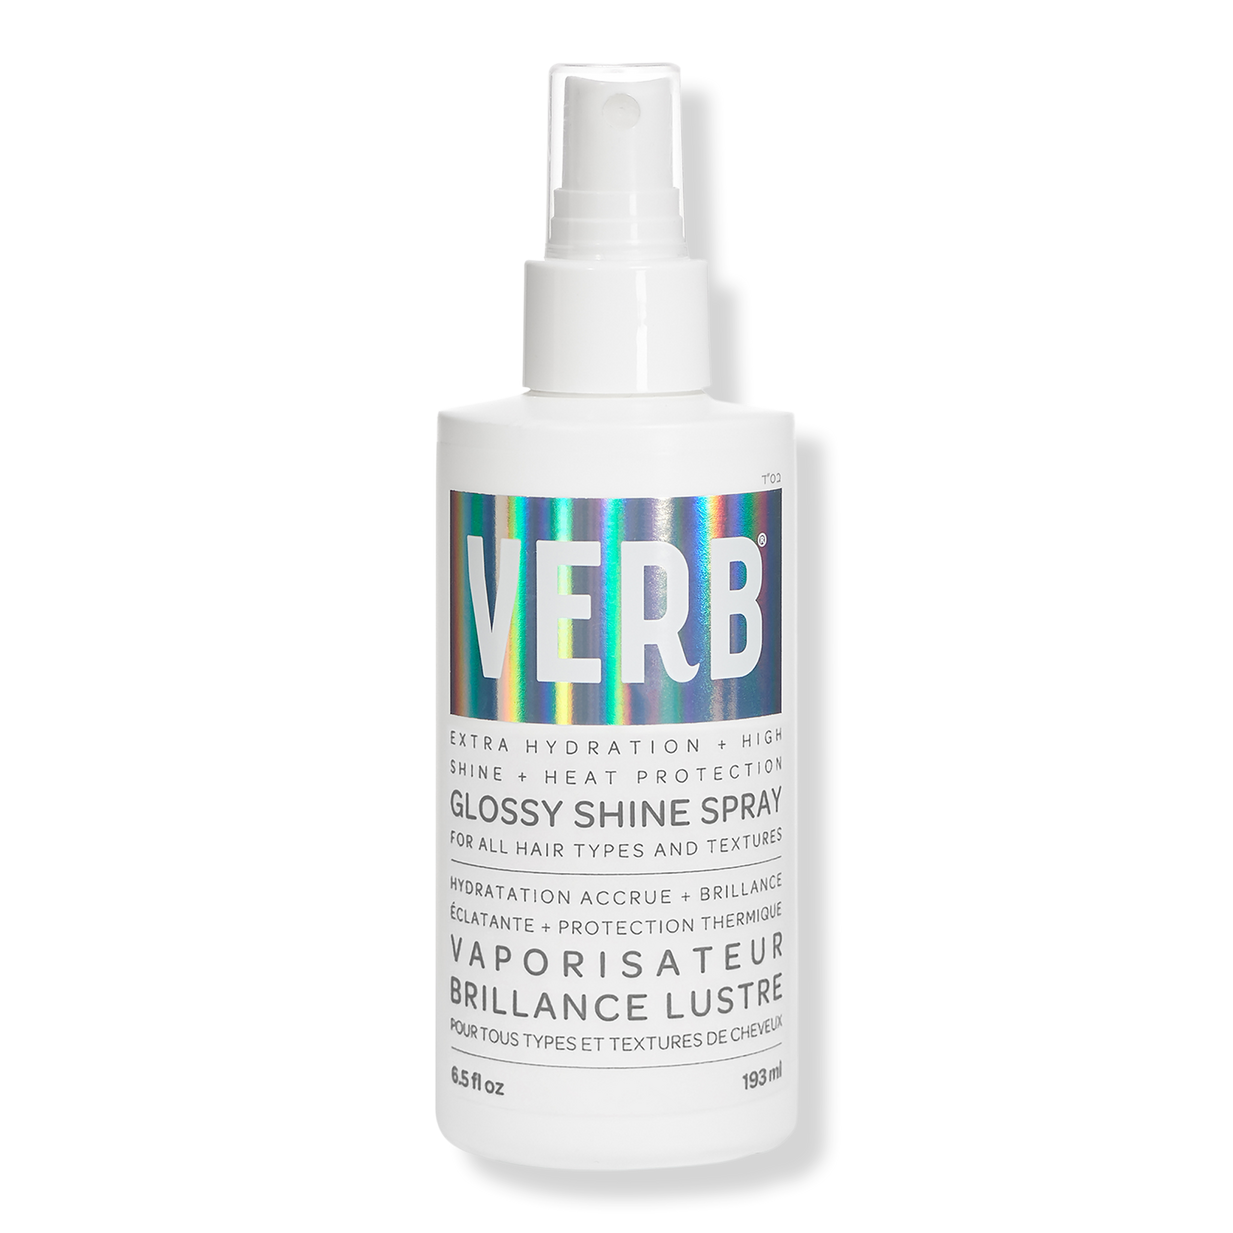 Glossy Shine Spray with Heat Protection - Verb